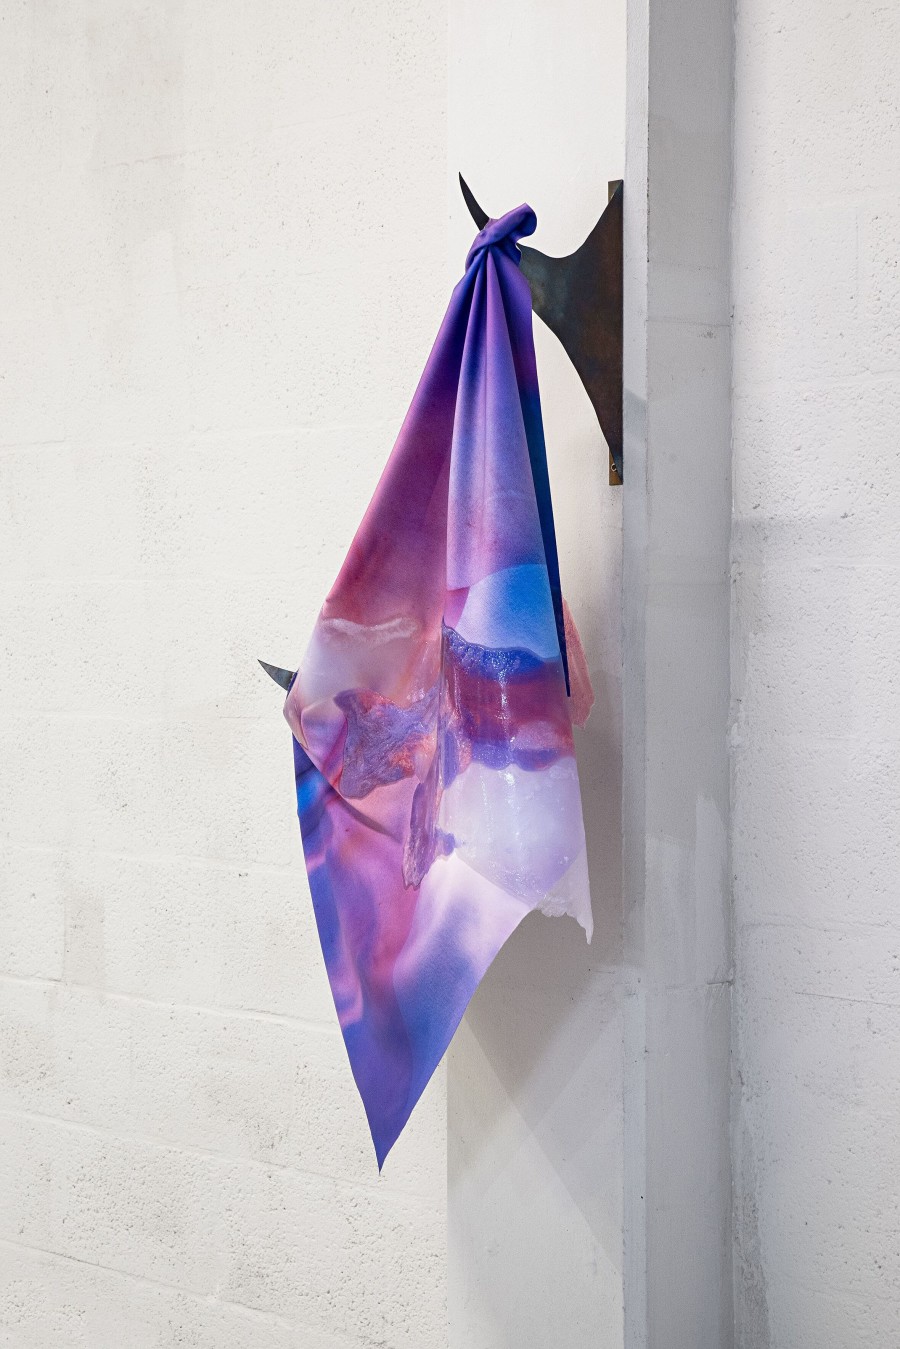 Rachele Monti "Impeto No.1", 2019 Photographic print on polyester fabric, urethane rubber, steel and audio Detailansicht The And Of The World, Bijlmerplein 698, Amsterdam, 2019 © Rachele Monti